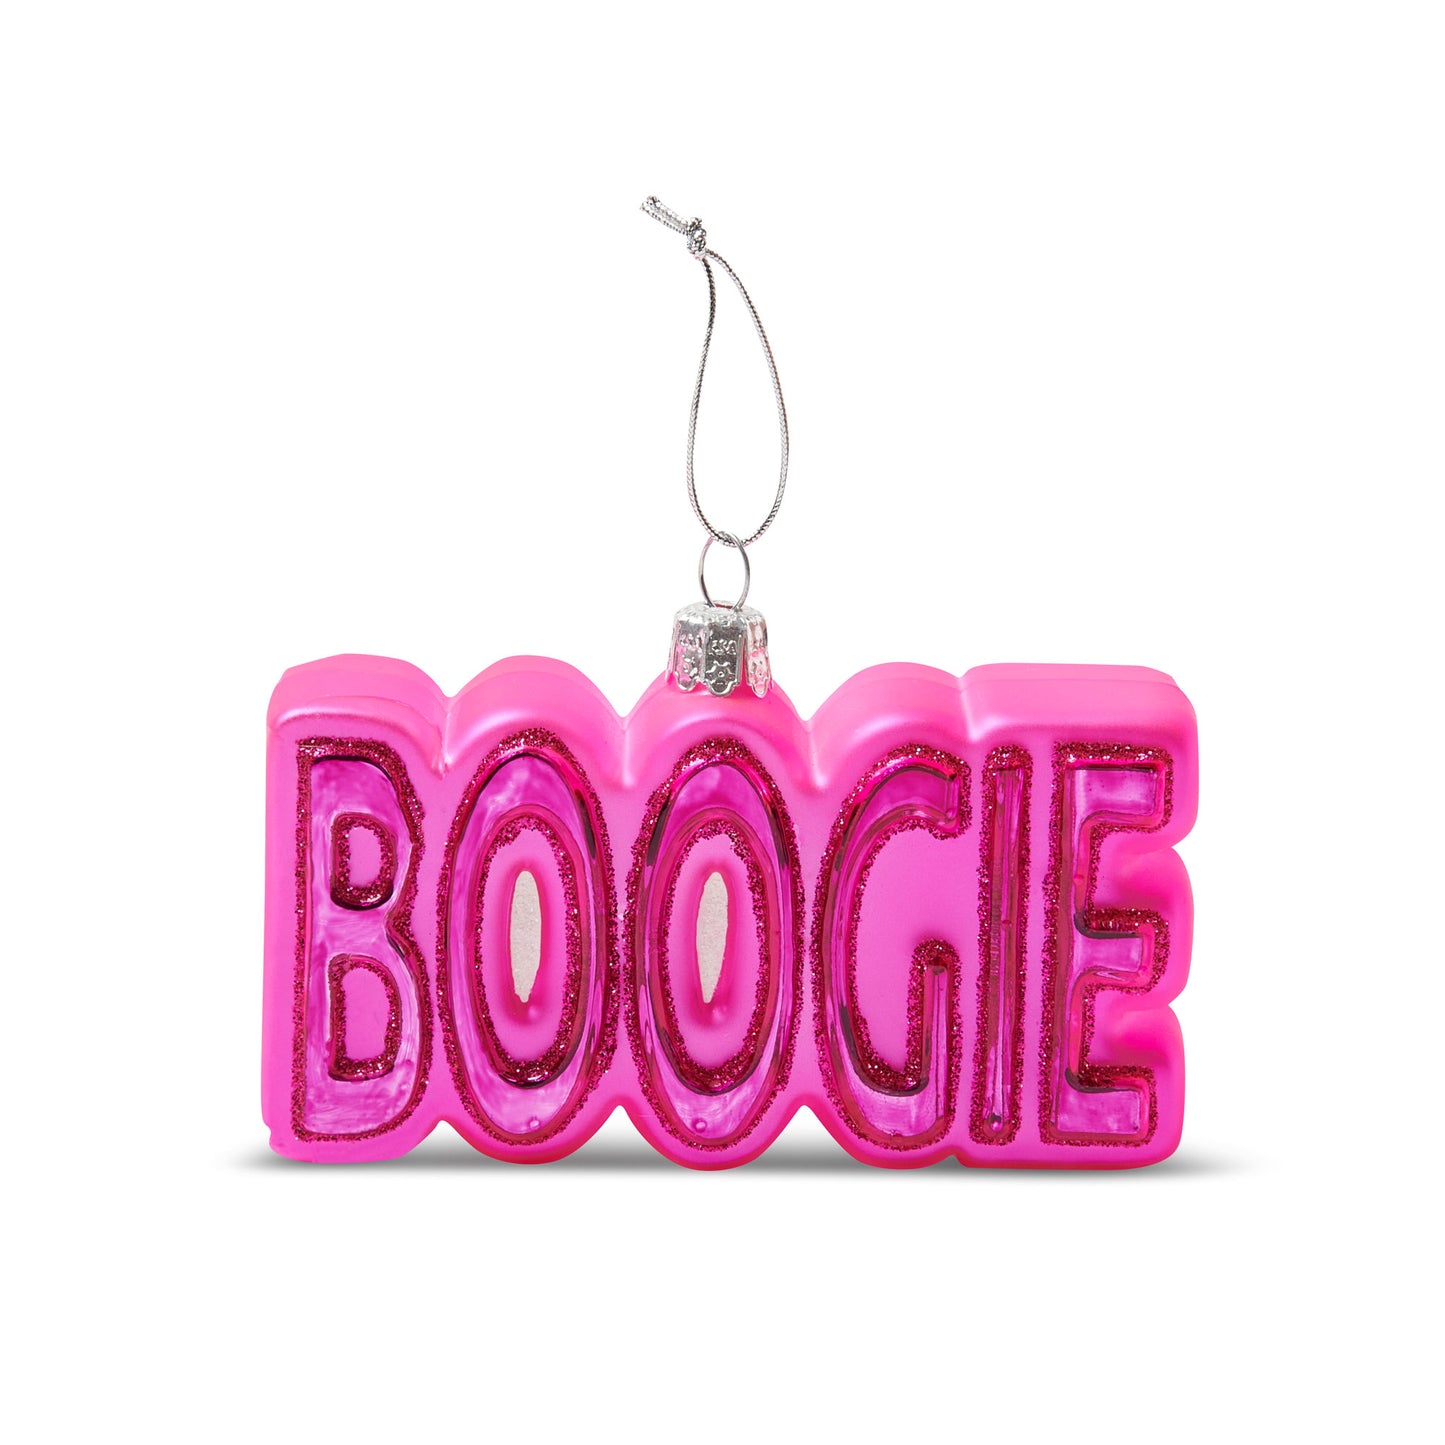 Boogie Word Glass Ornament